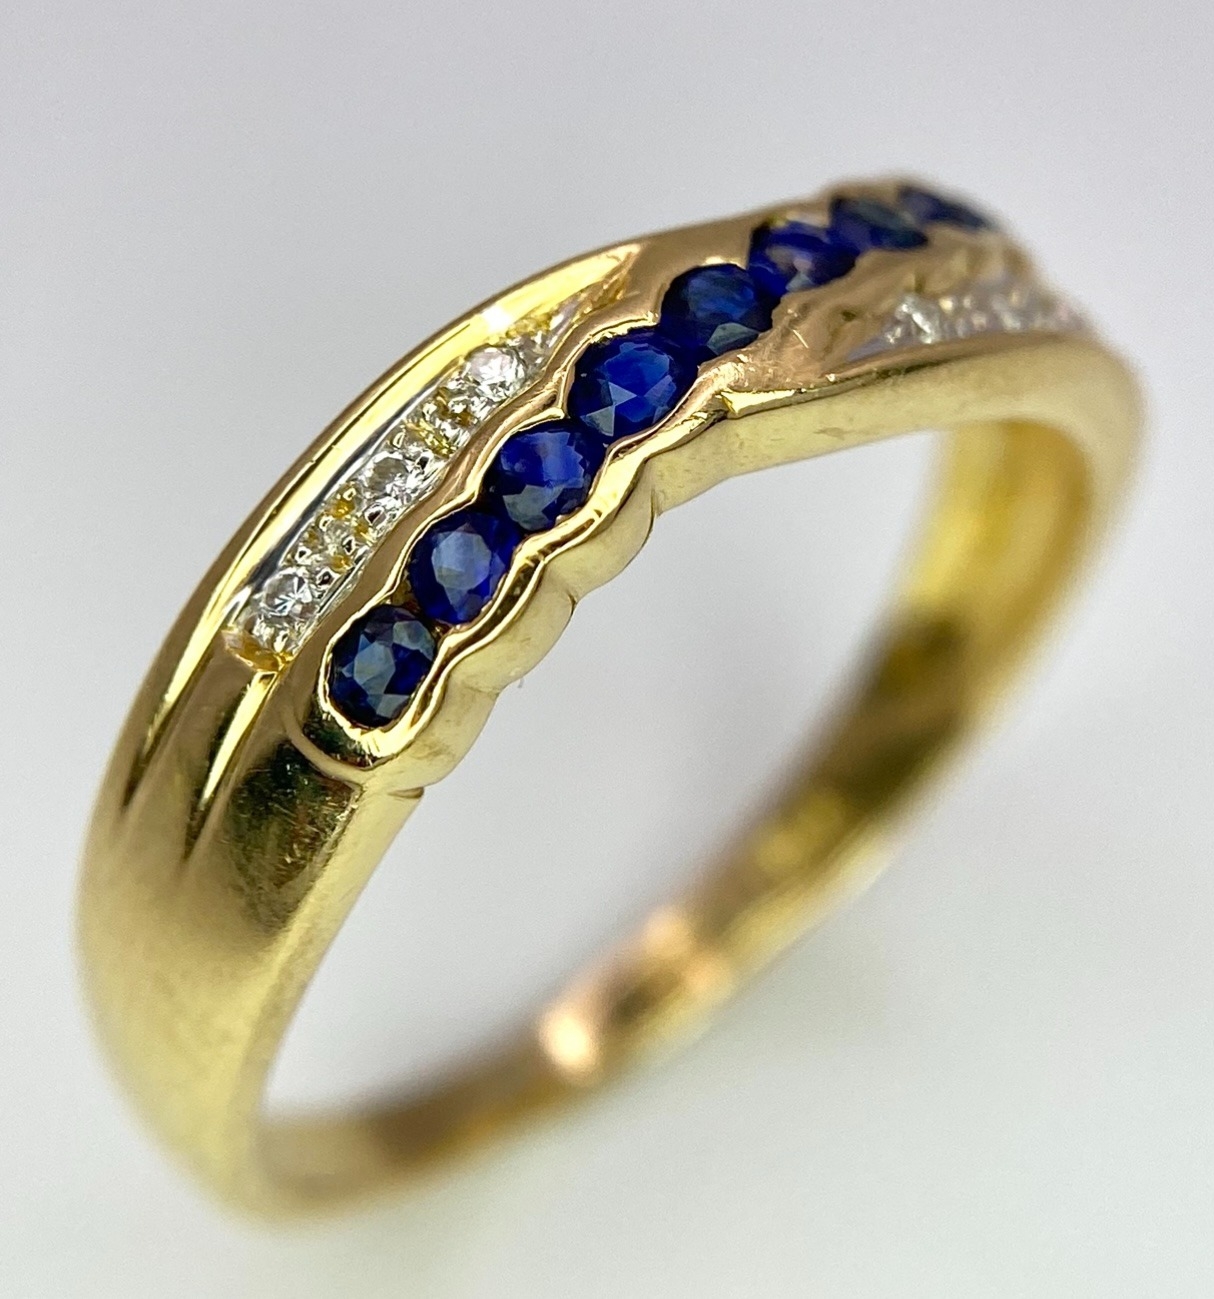 AN 18K YELLOW GOLD DIAMOND & BLUE STONE (PROBABLY SAPPHIRE) CROSSOVER RING. Size O, 2.7g total - Bild 5 aus 6